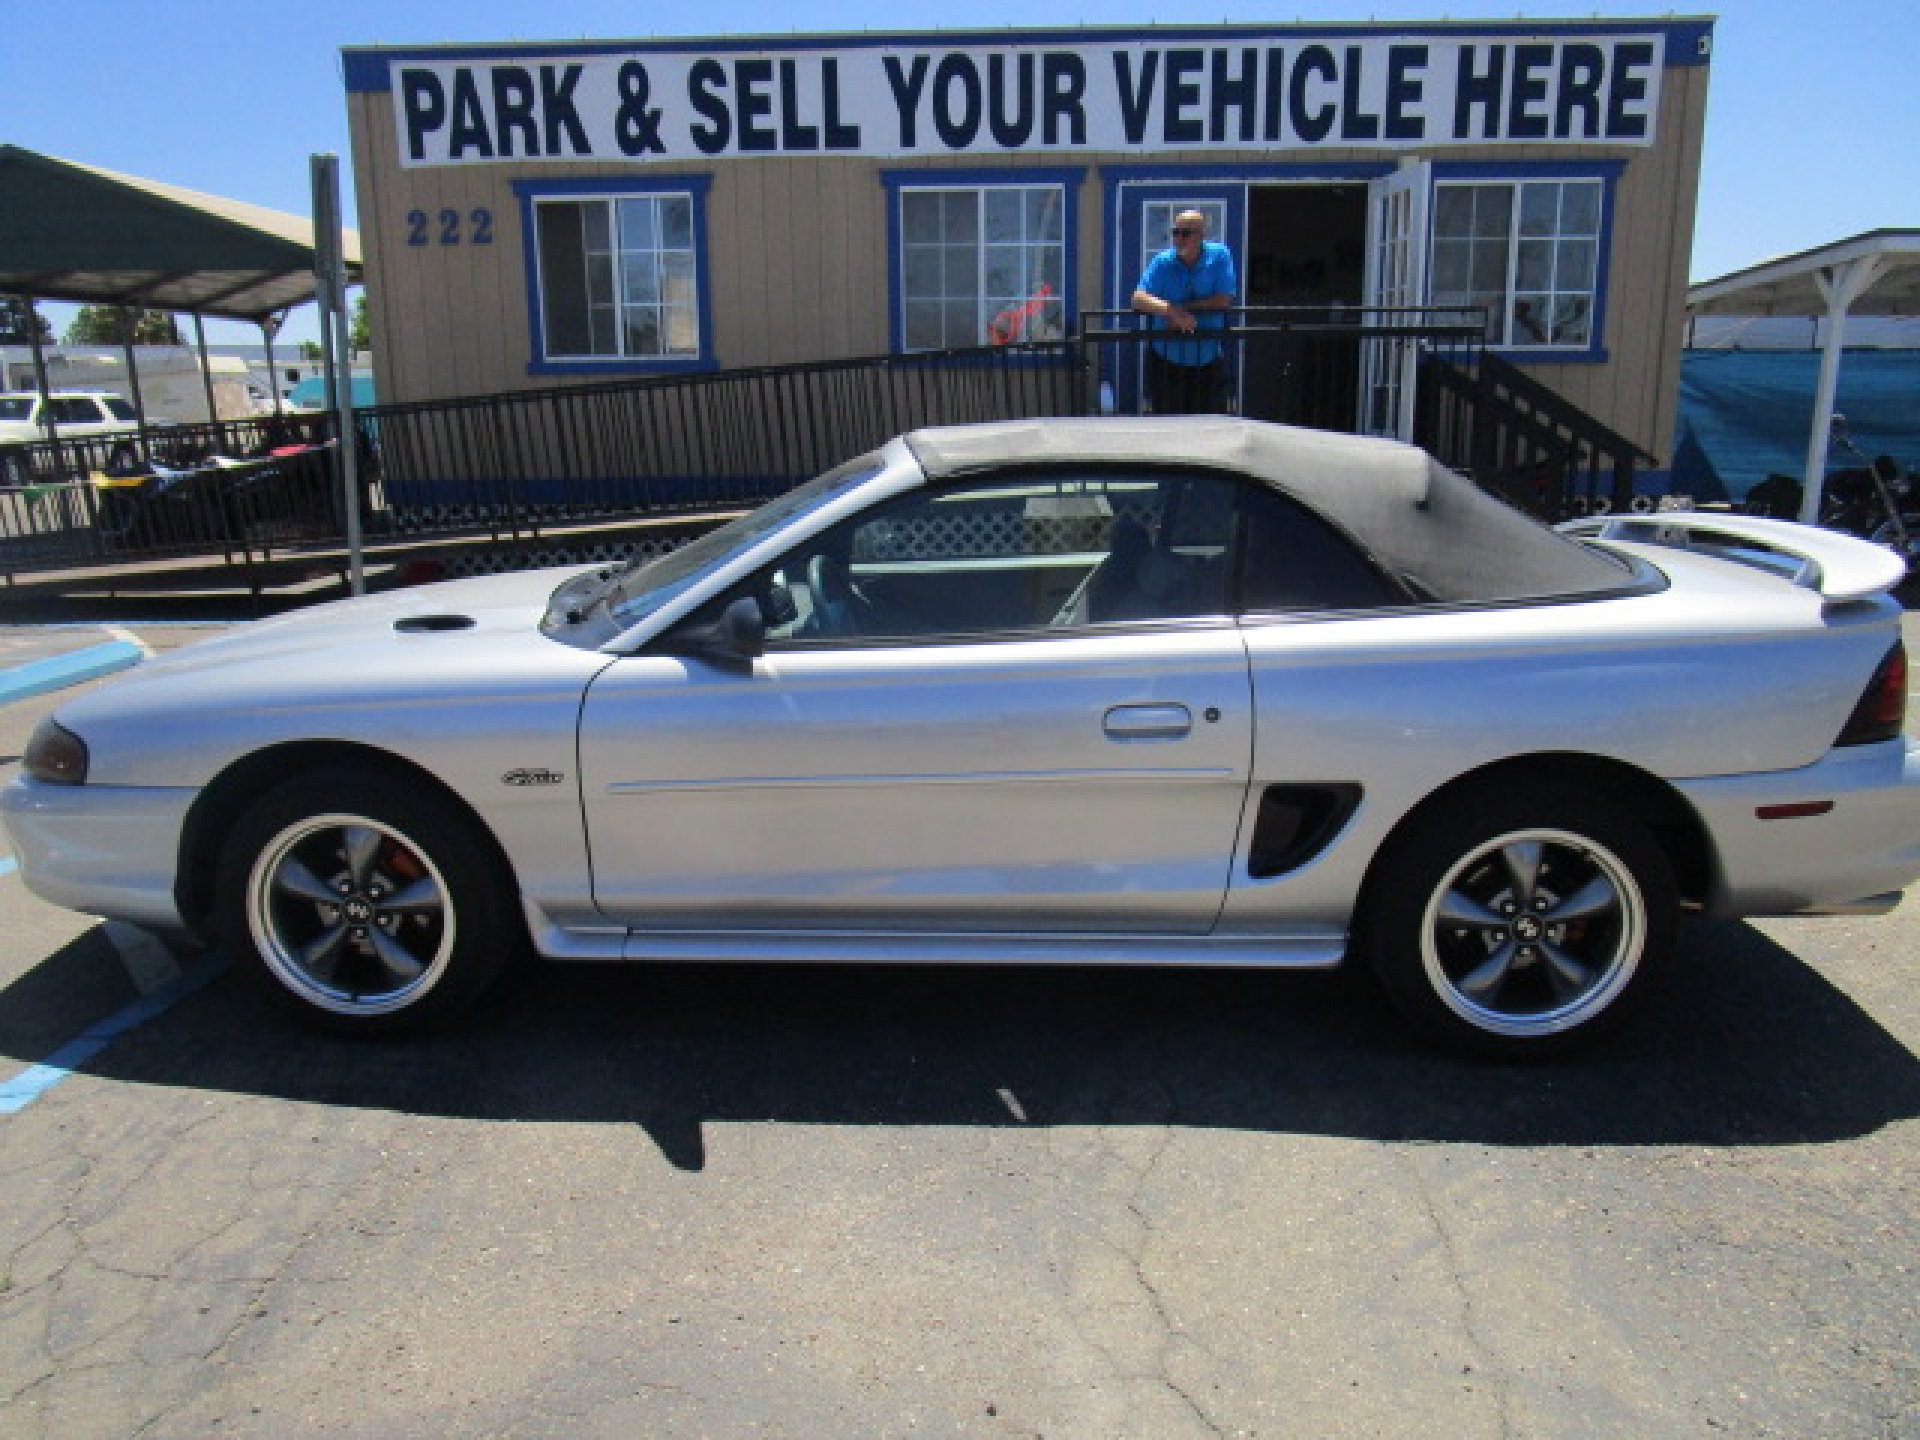 1998 Ford Mustang GT Convertable